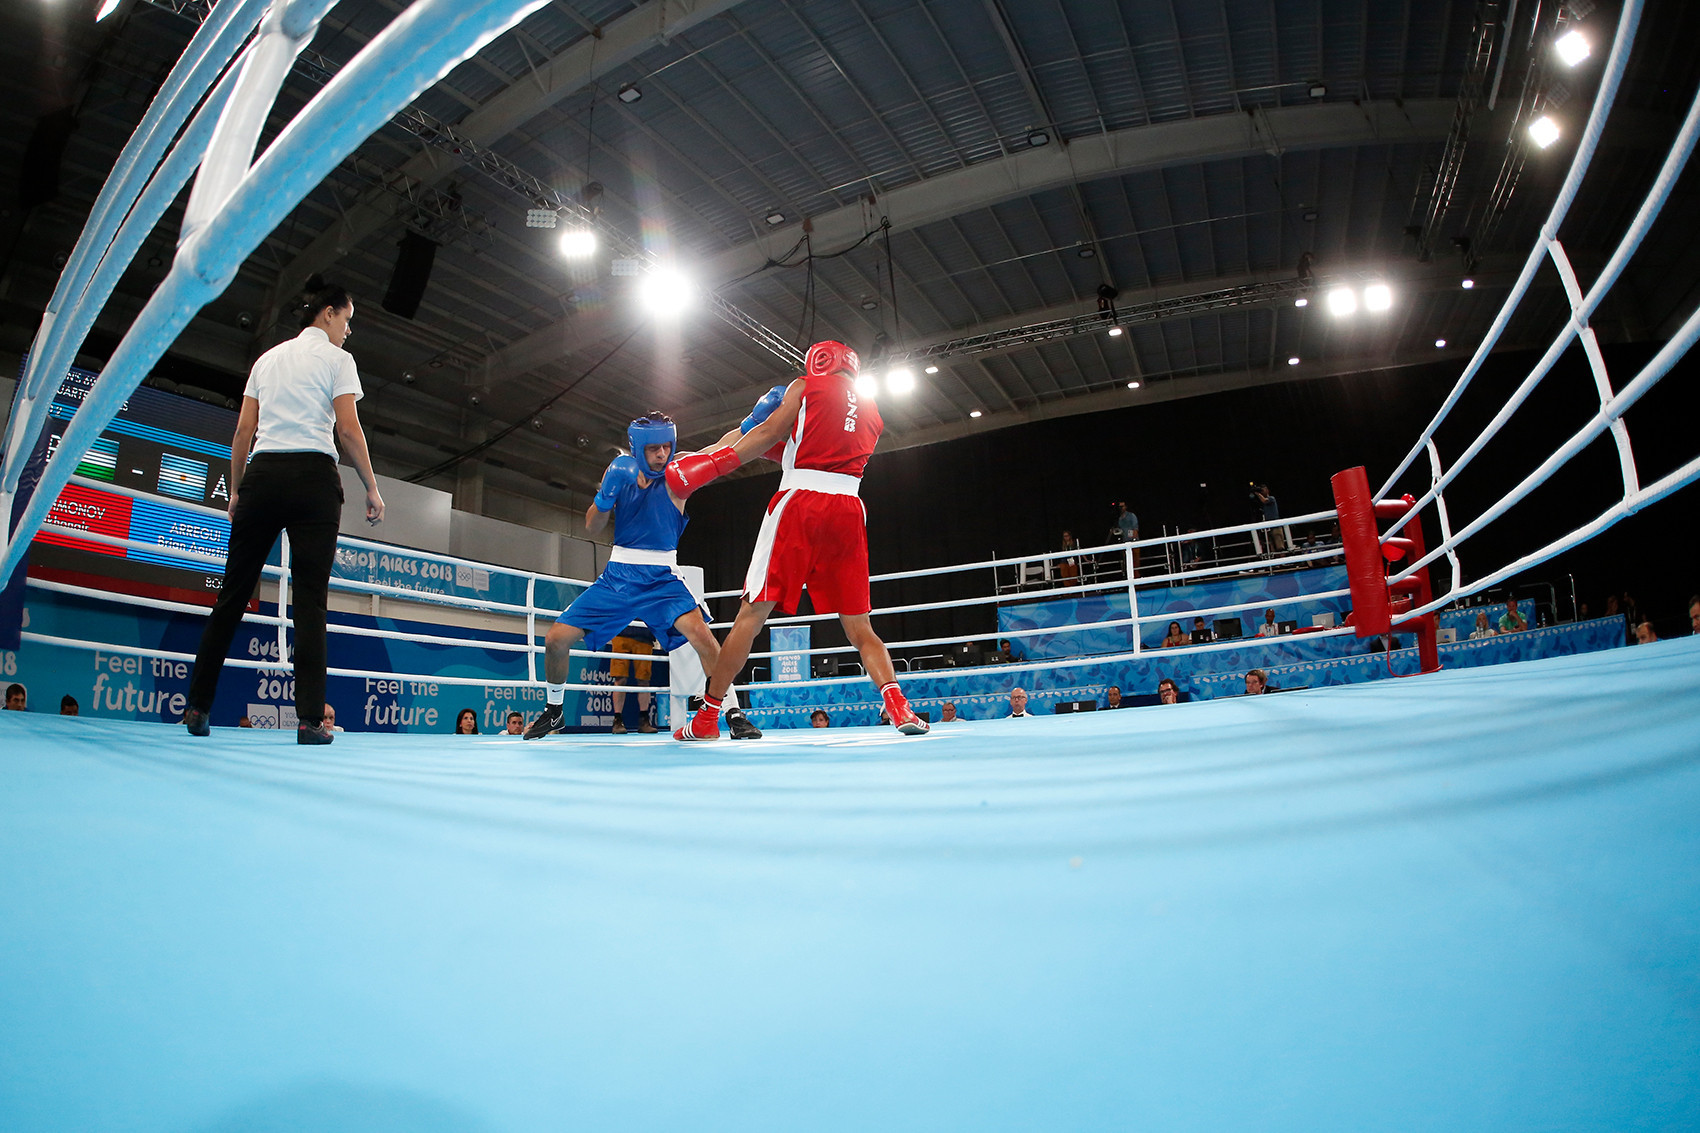 Boxing action began today as the sport continues its fight to remain on the Olympic programme ©Buenos Aires 2018